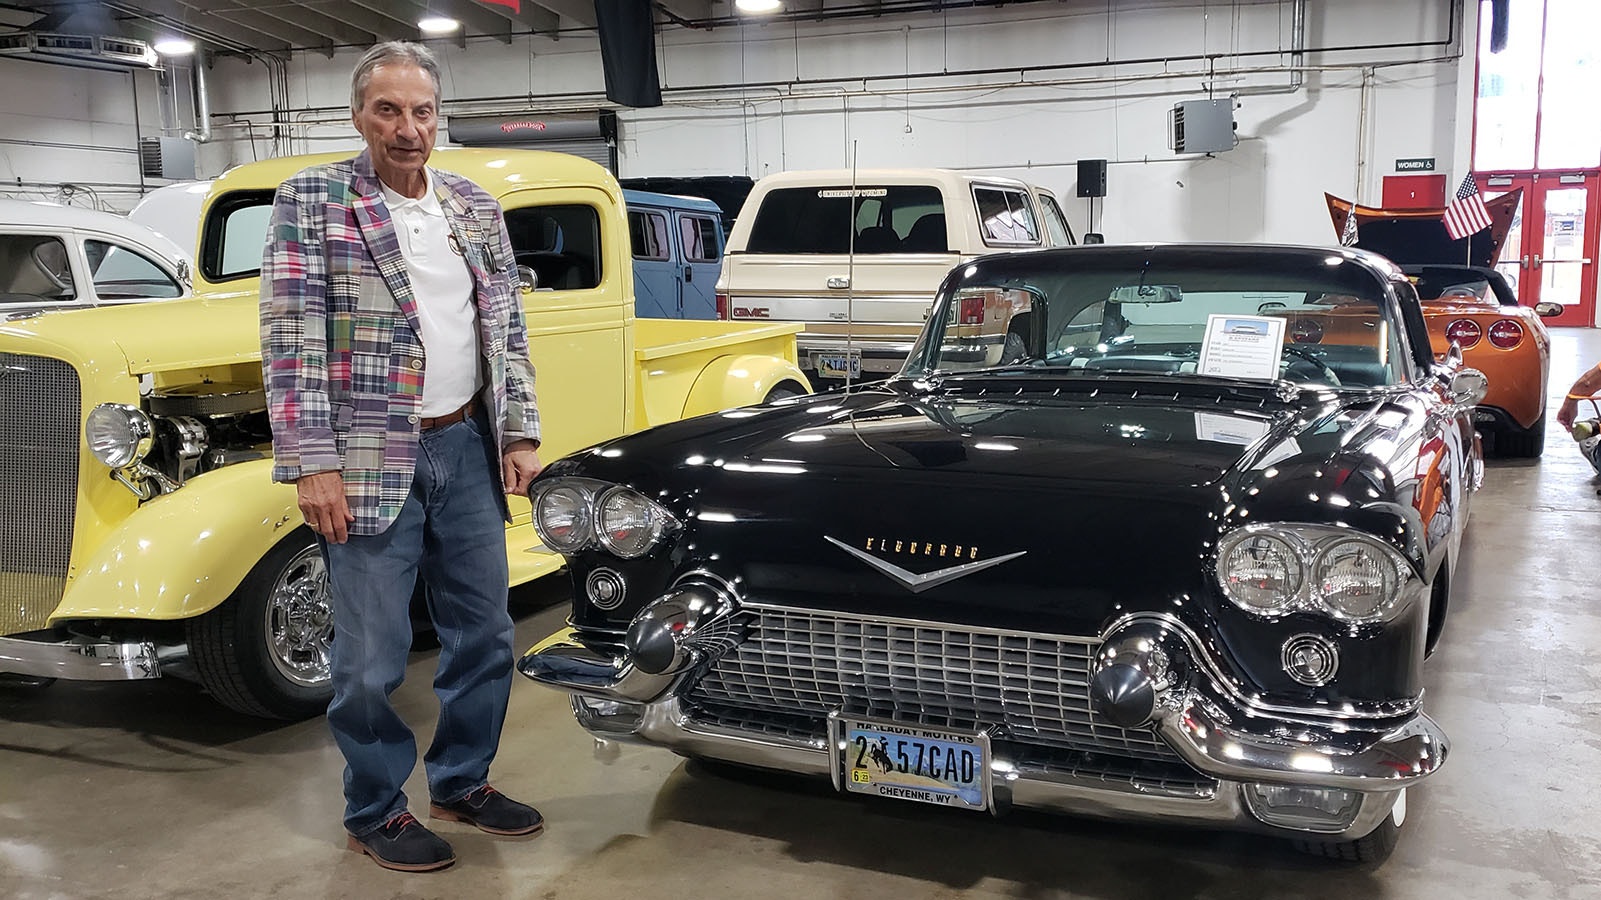 Cars Guitars and Cigars organizer Timothy Joannides poses with his 1957 Cadillac Eldorado Brougham. Only 400 like it were made.